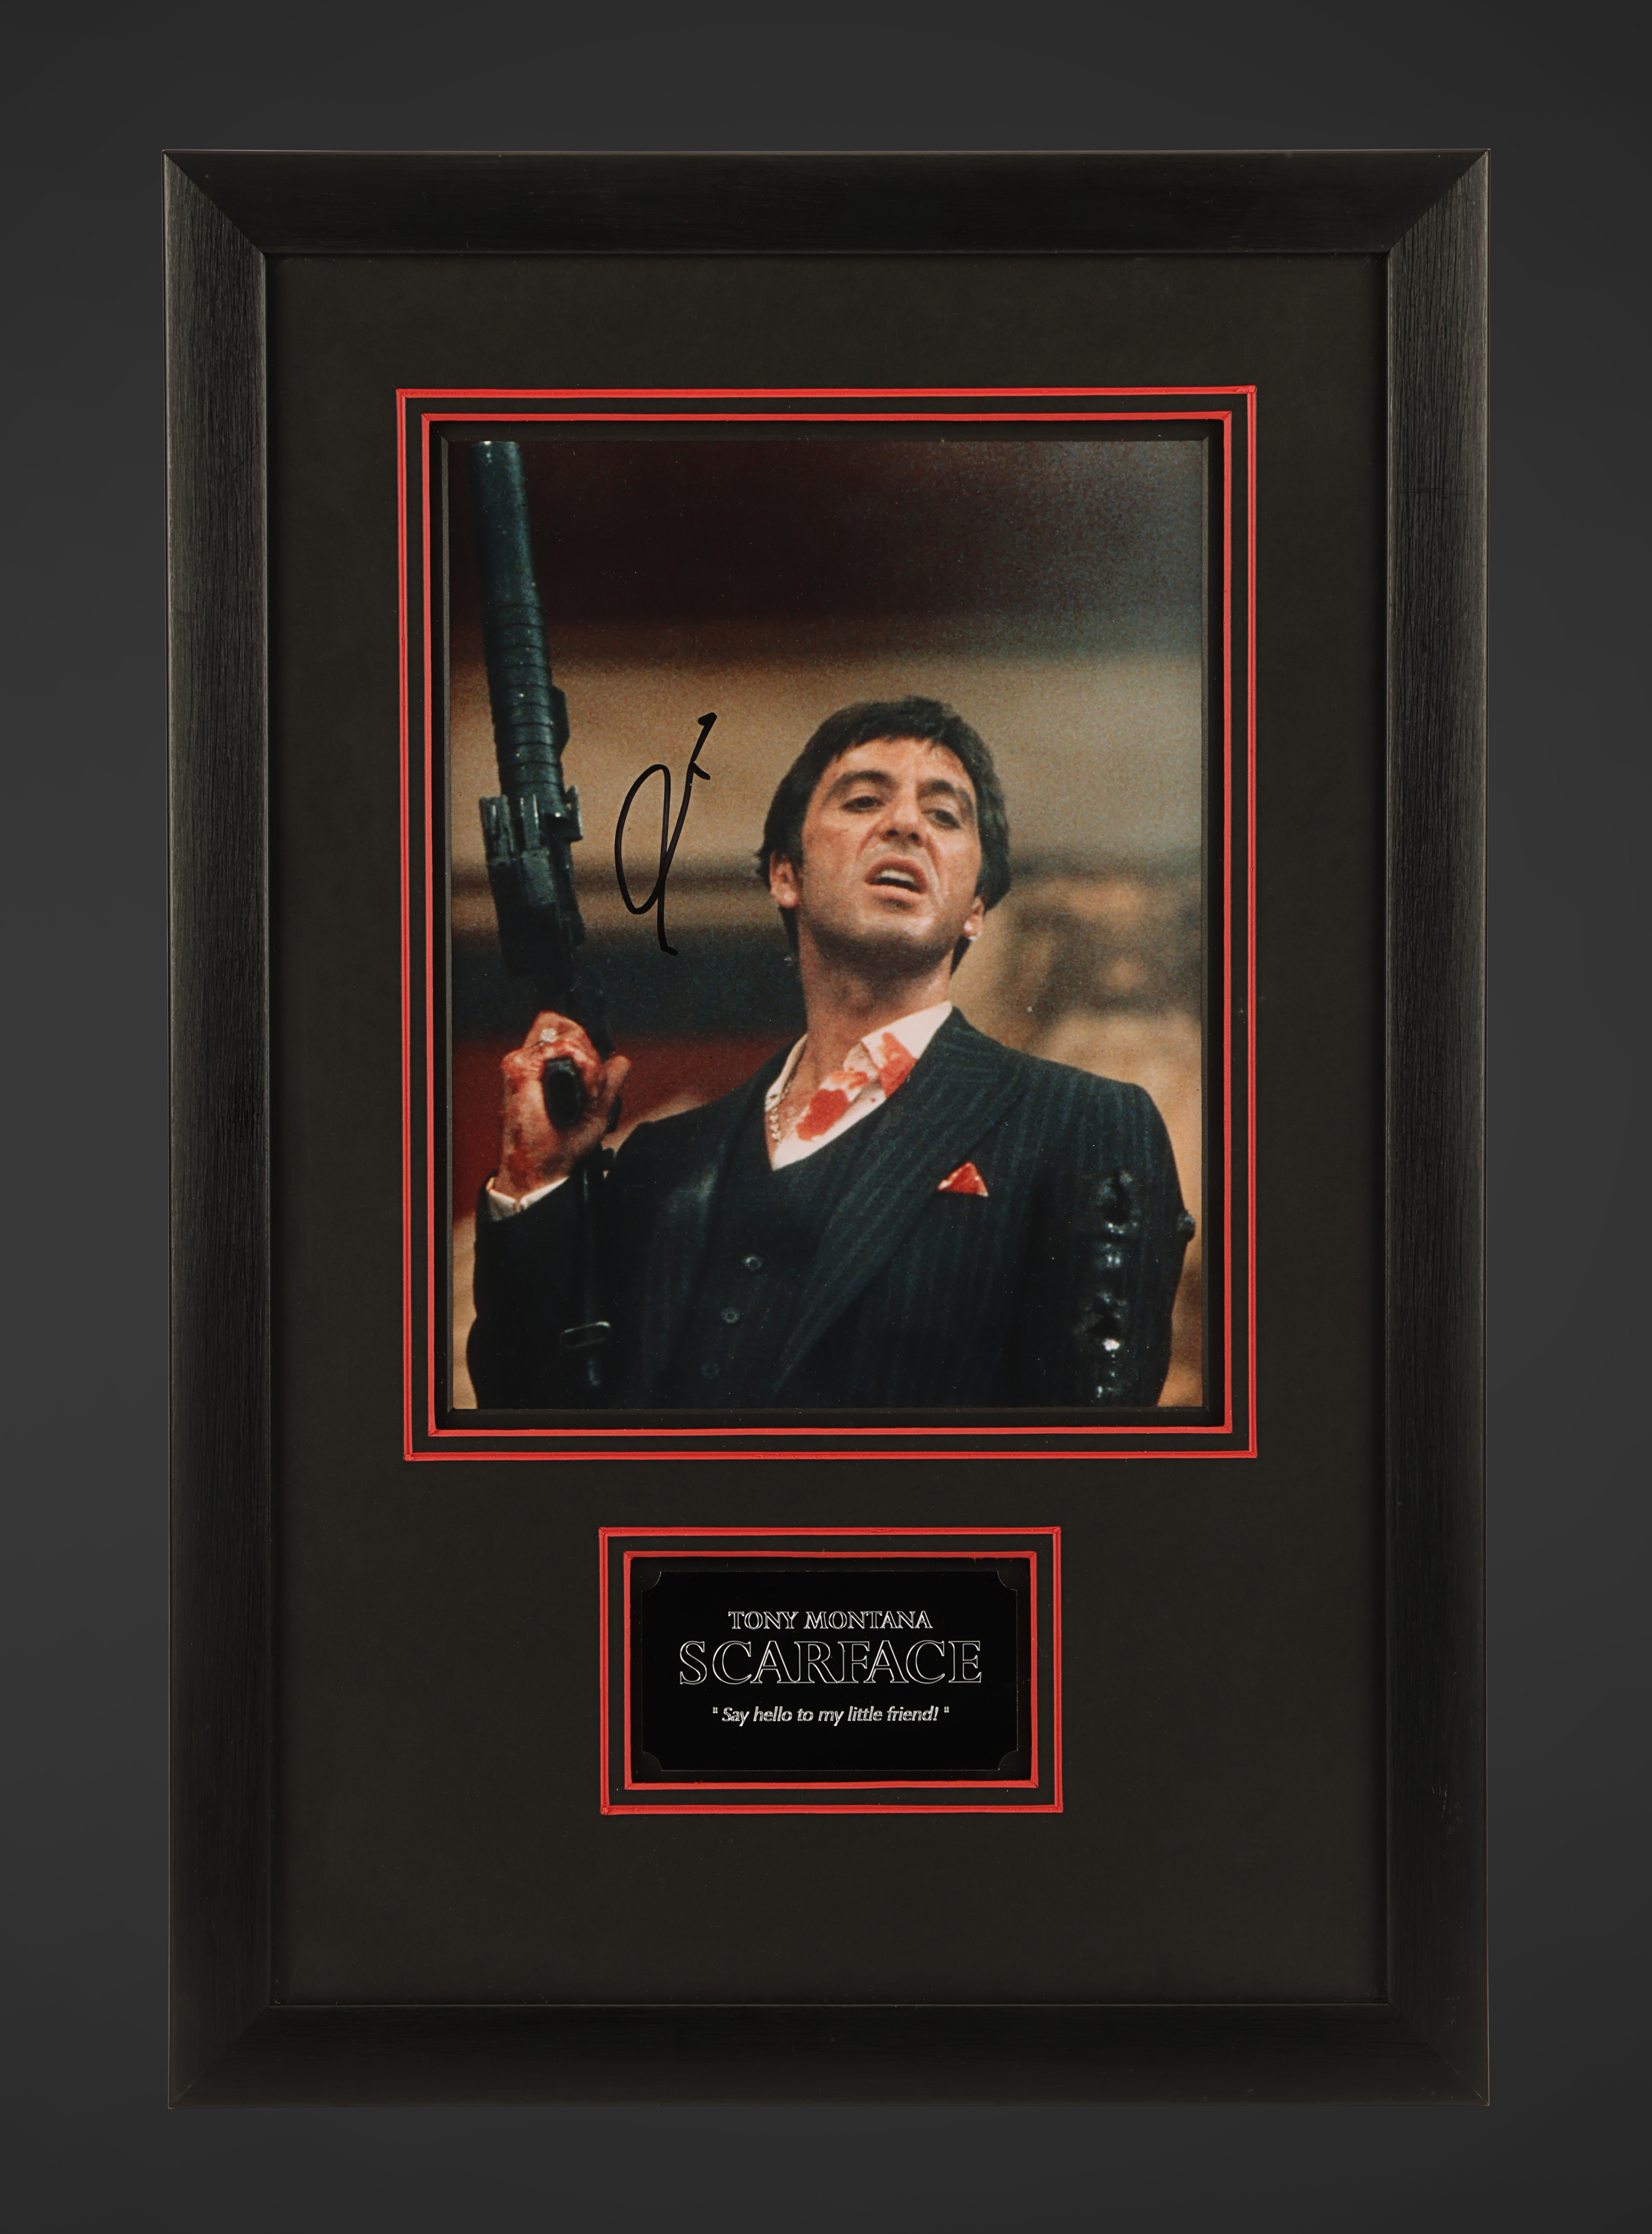 SCARFACE (1983) - Al Pacino Framed Autograph Display